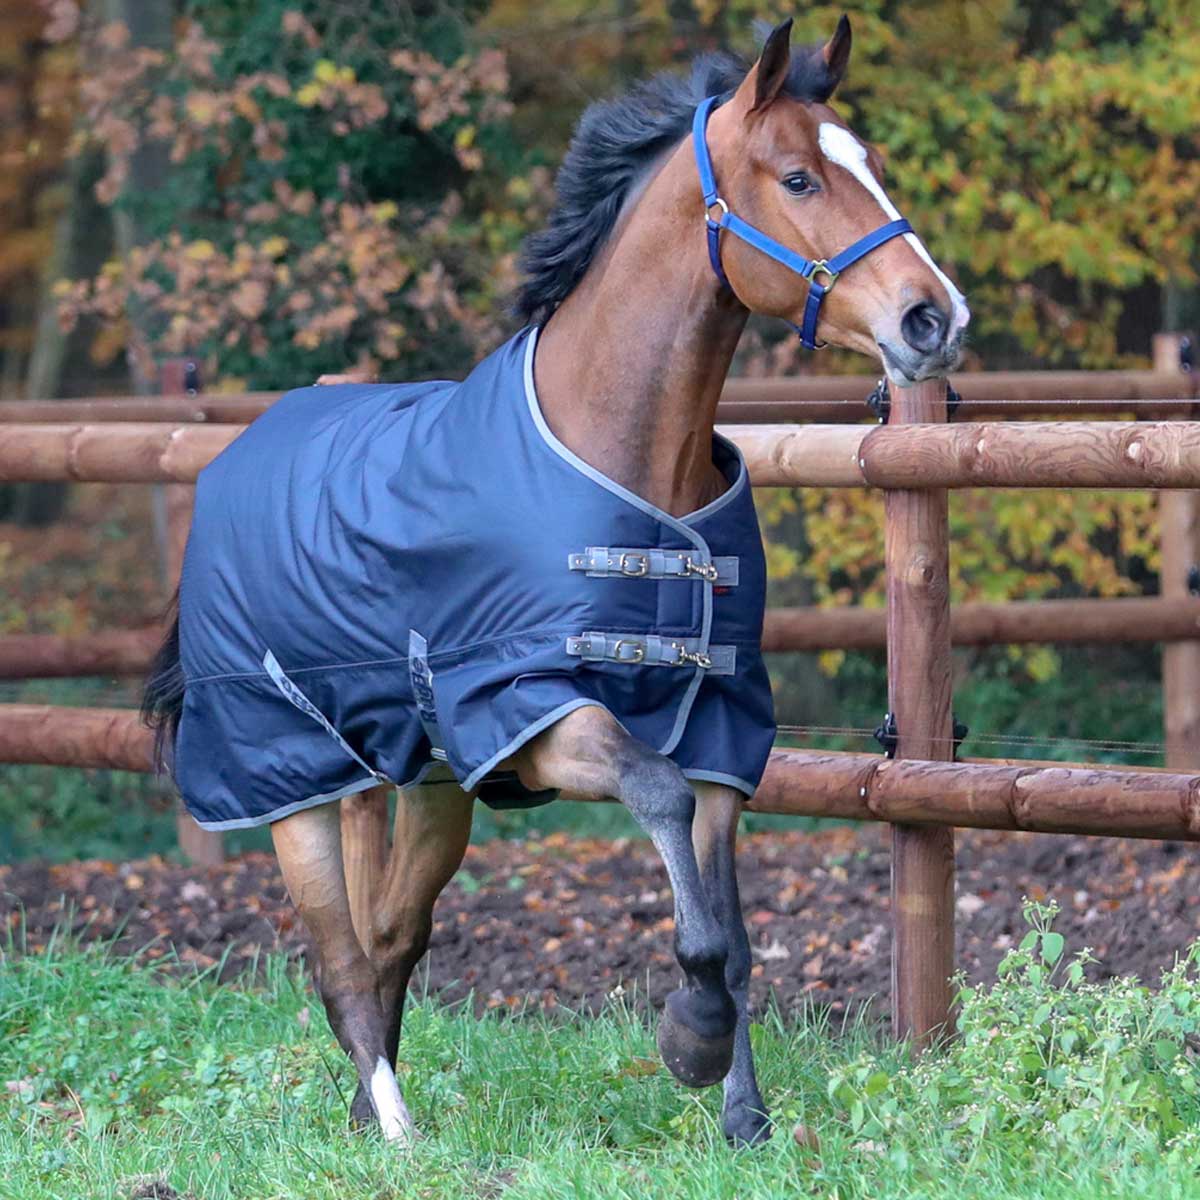 Covalliero Tapis de cheval RugBe IceProtect navy 600d, 300g 125